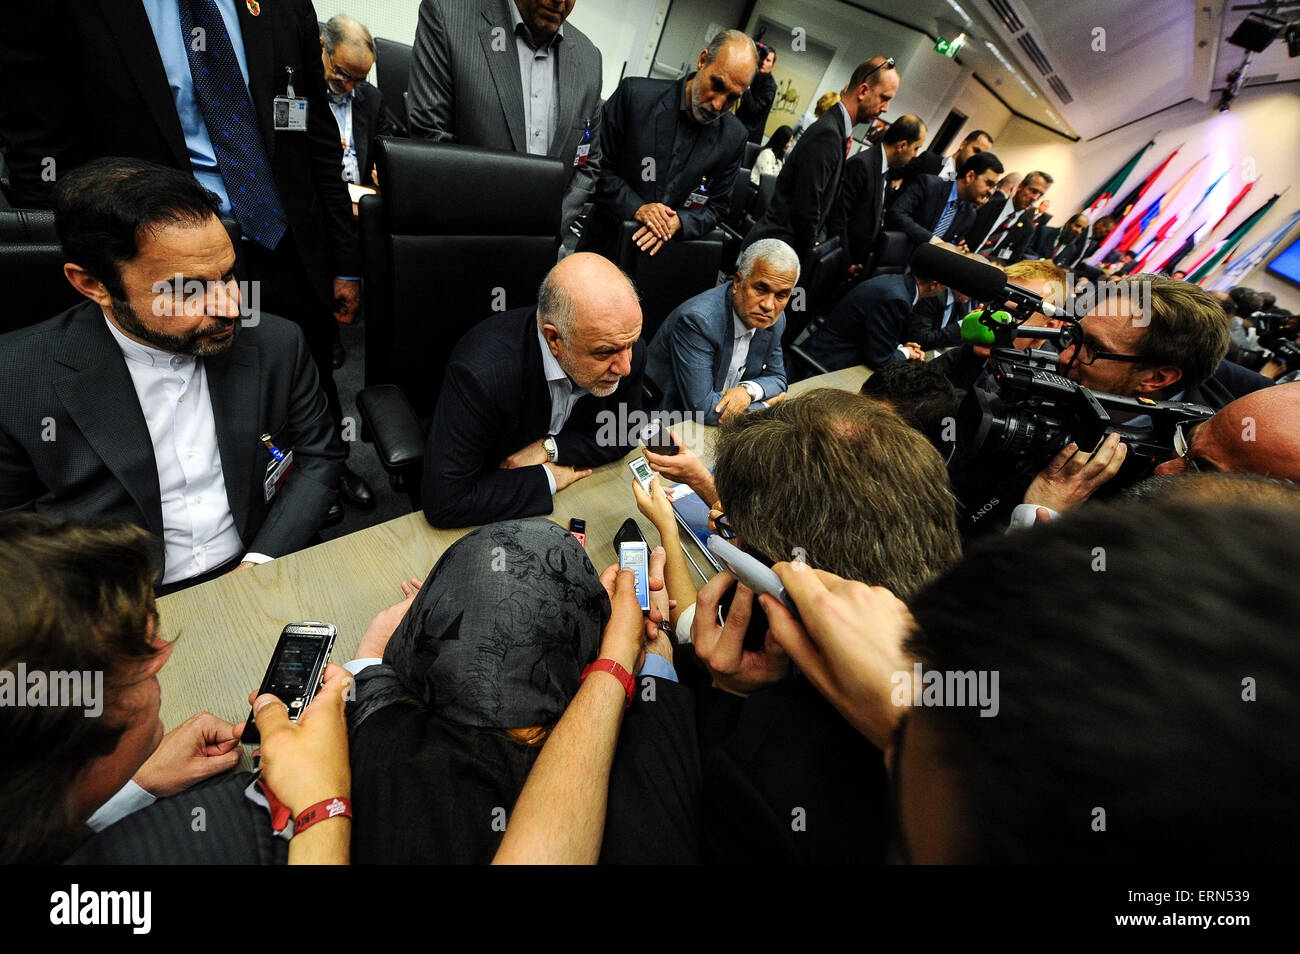 Vienna, Austria. 5th June, 2015. Iran's Minister of Petroleum Bijan Namdar Zangeneh (C) speaks to journalists before the 167th Ministerial Meeting of the Organization of the Petroleum Exporting Countries (OPEC) at the headquarters of OPEC in Vienna, Austria, June 5, 2015. Credit:  Qian Yi/Xinhua/Alamy Live News Stock Photo